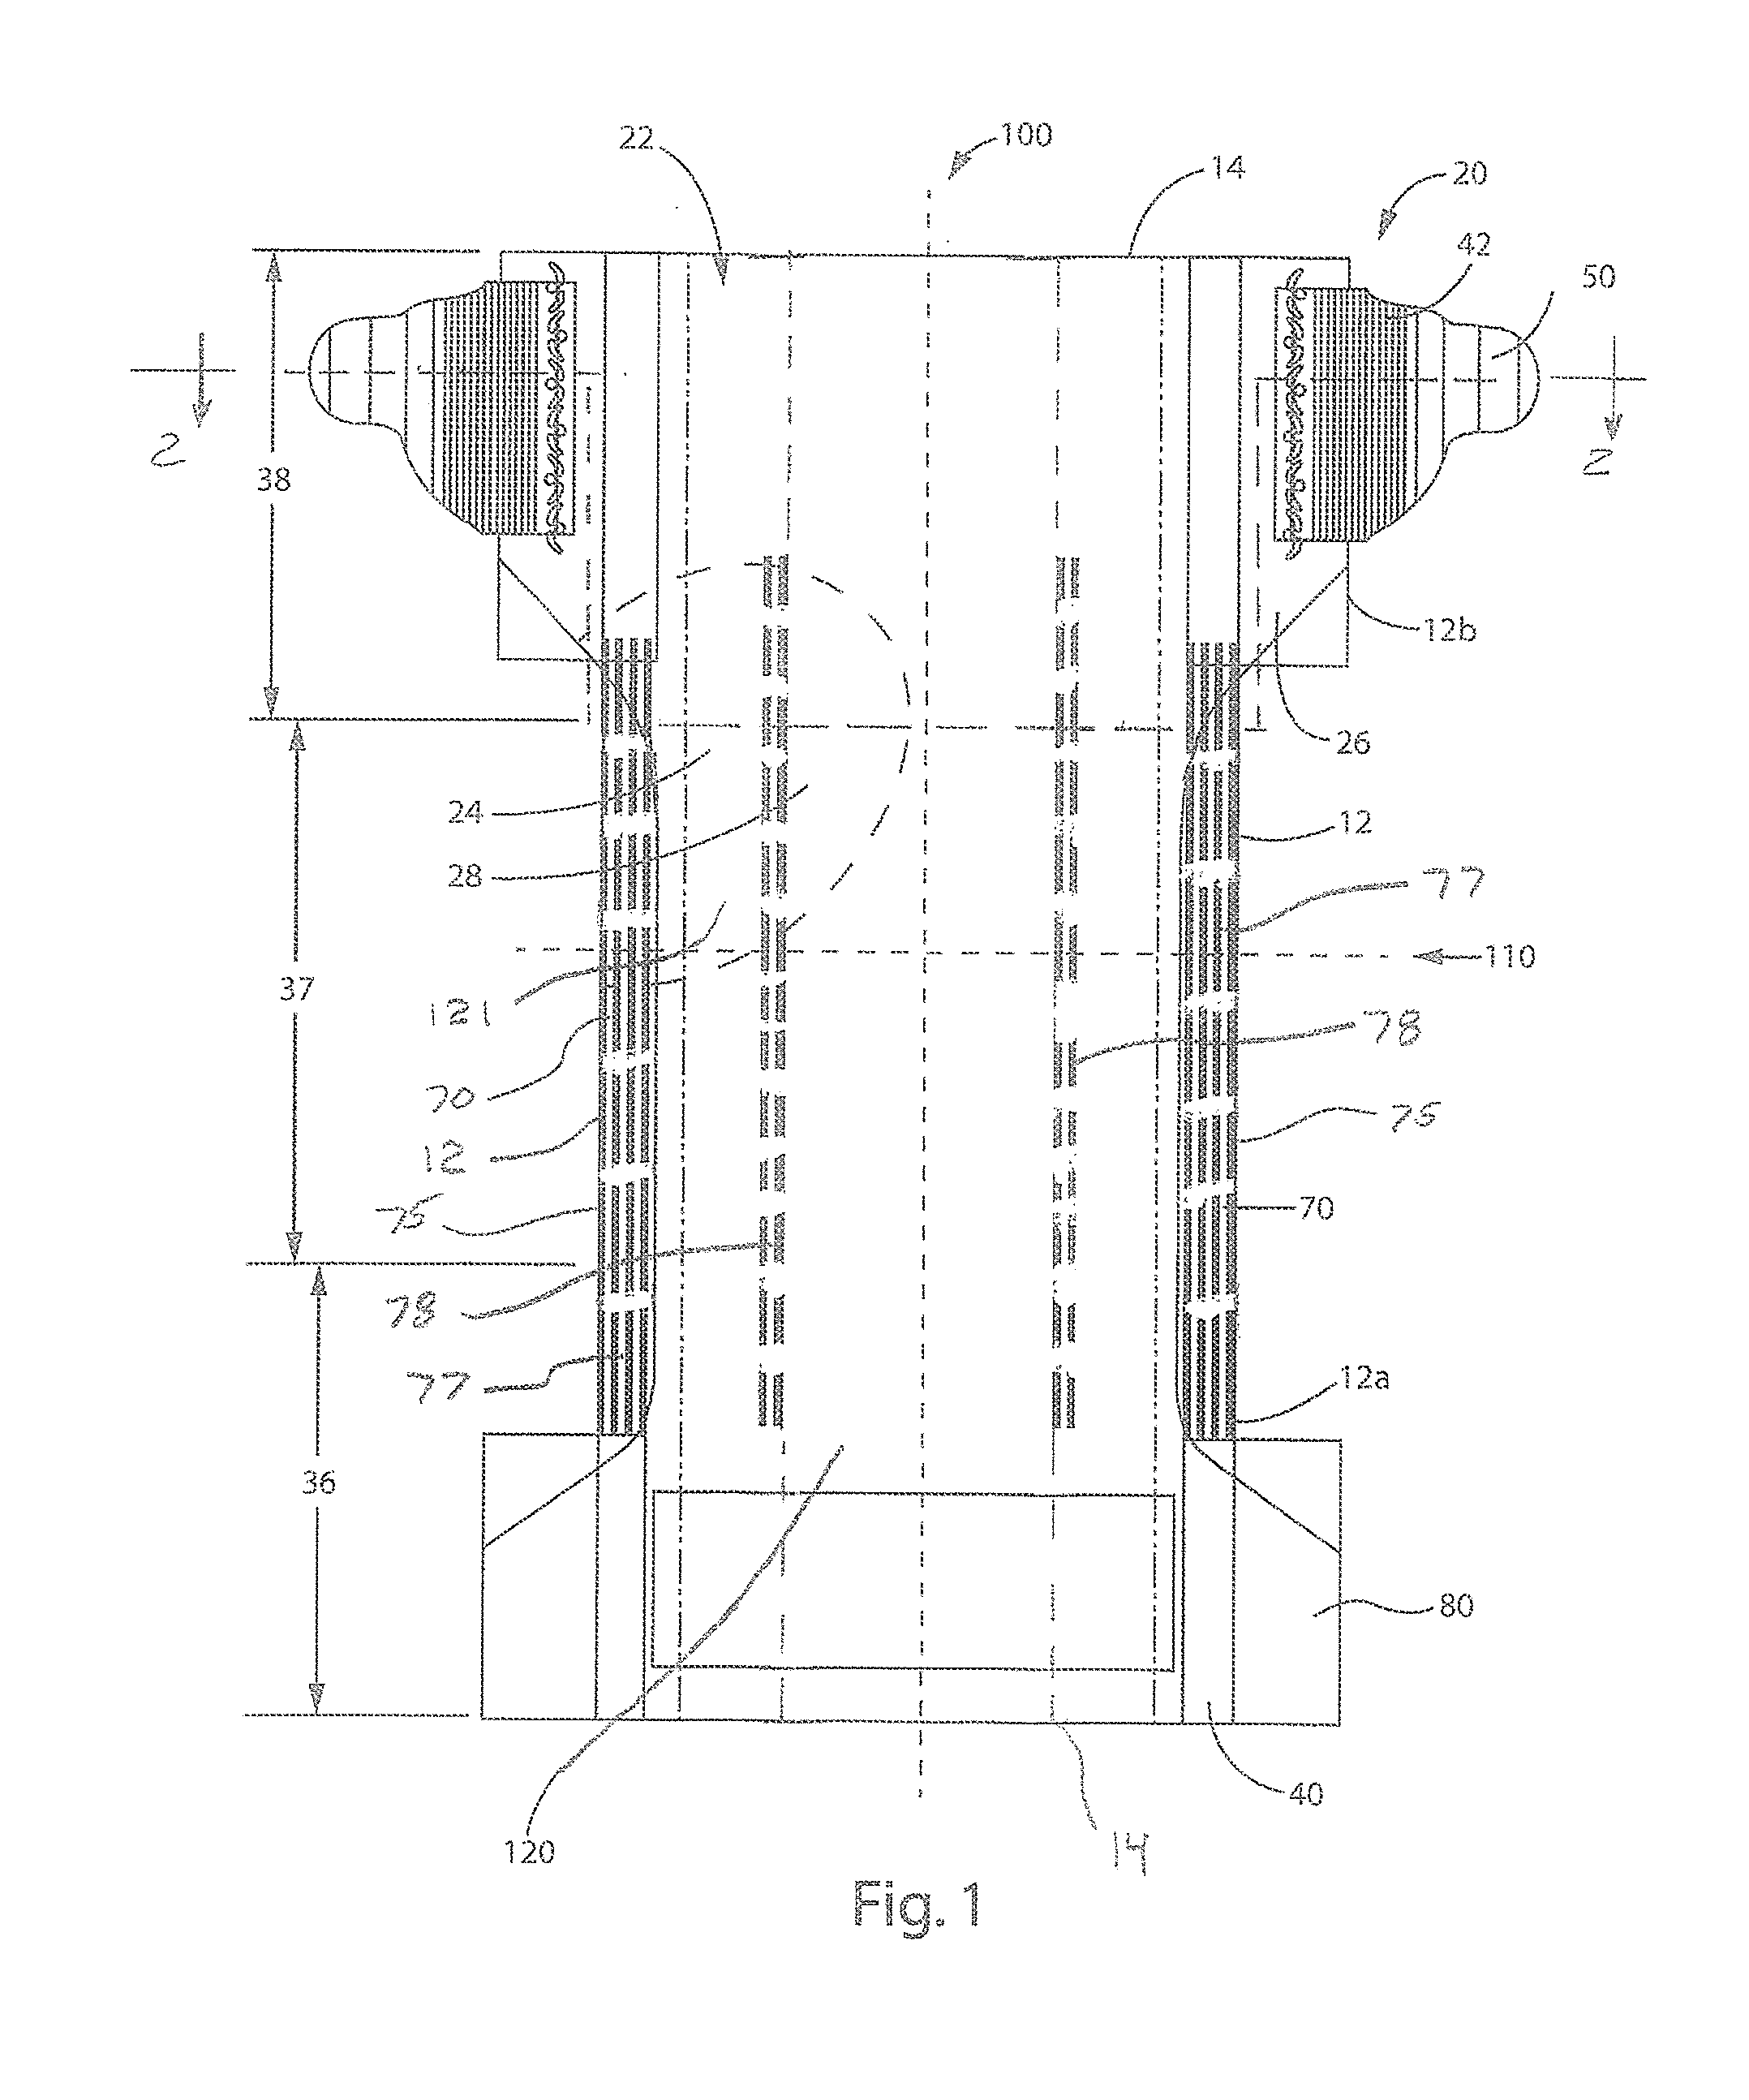 Methods and Apparatuses for Making Leg Cuffs for Absorbent Articles